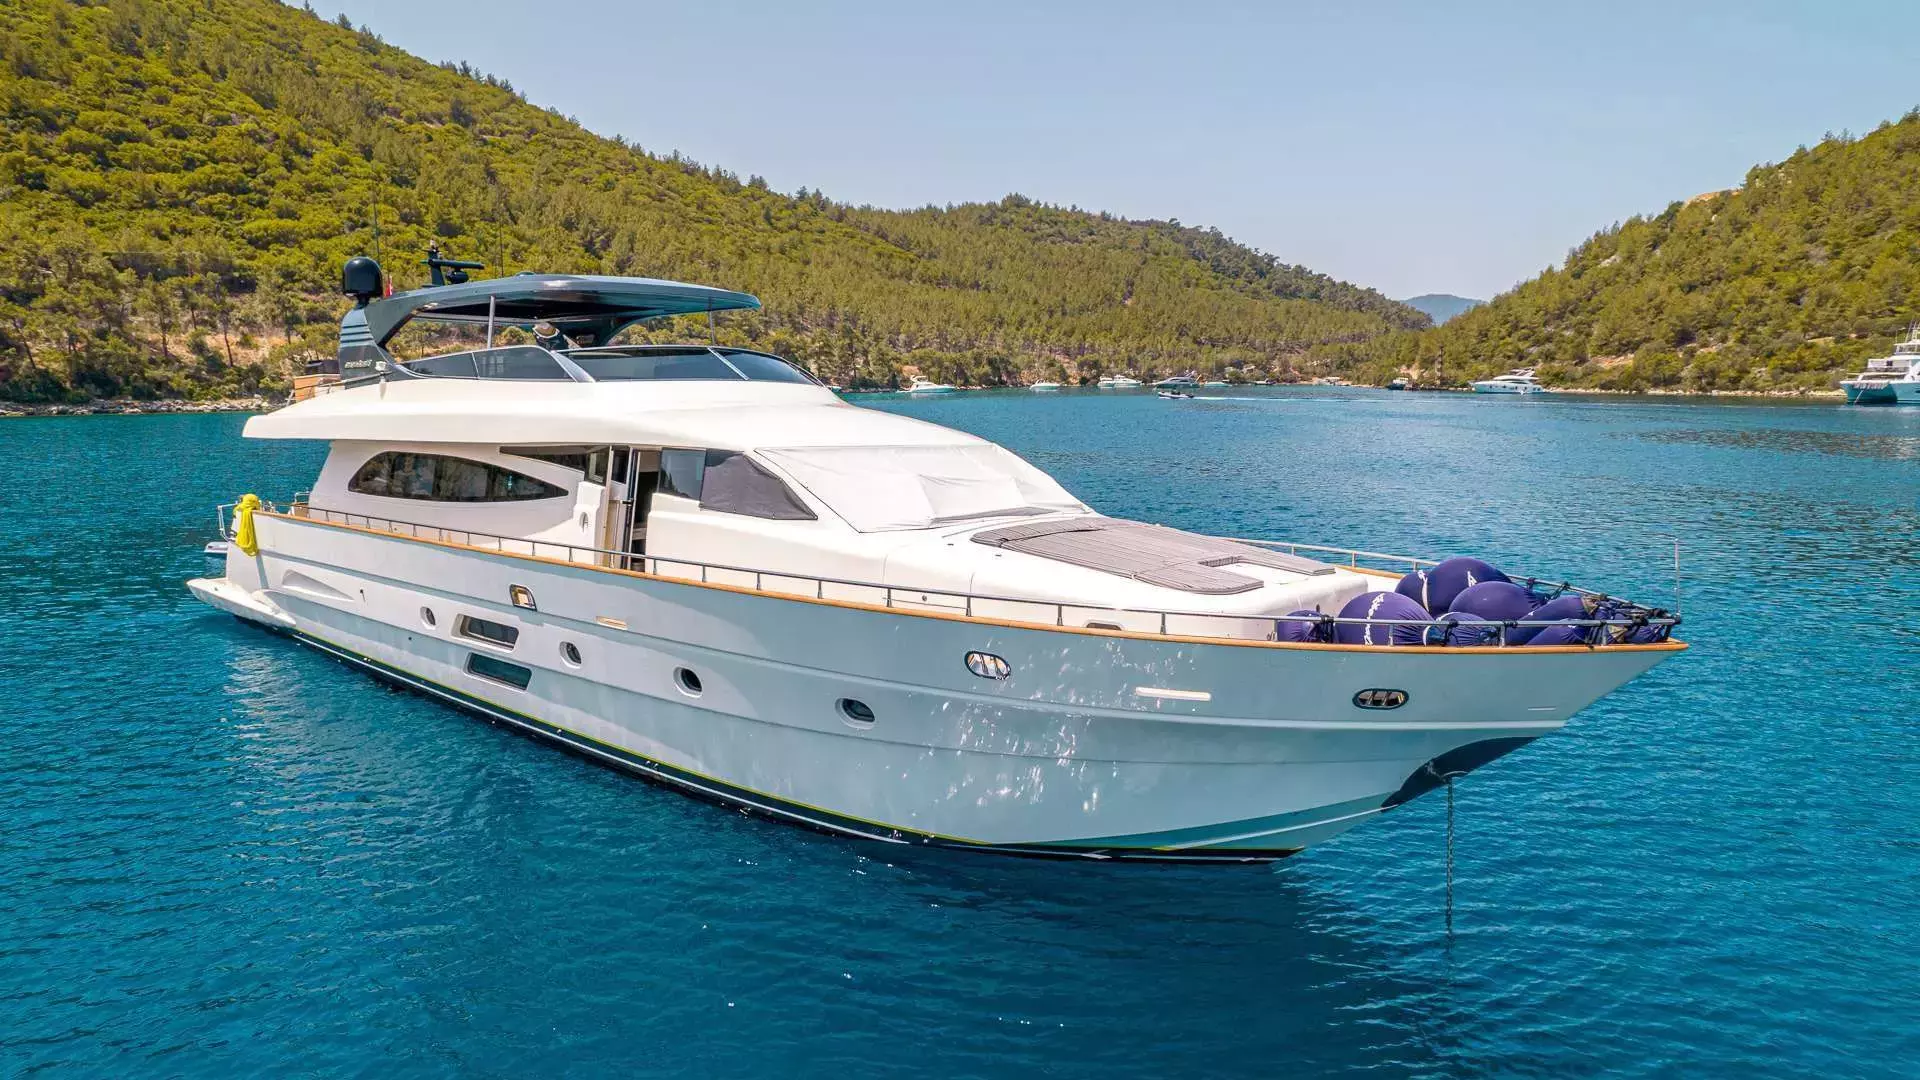 Liberata by Canados - Top rates for a Charter of a private Motor Yacht in Turkey